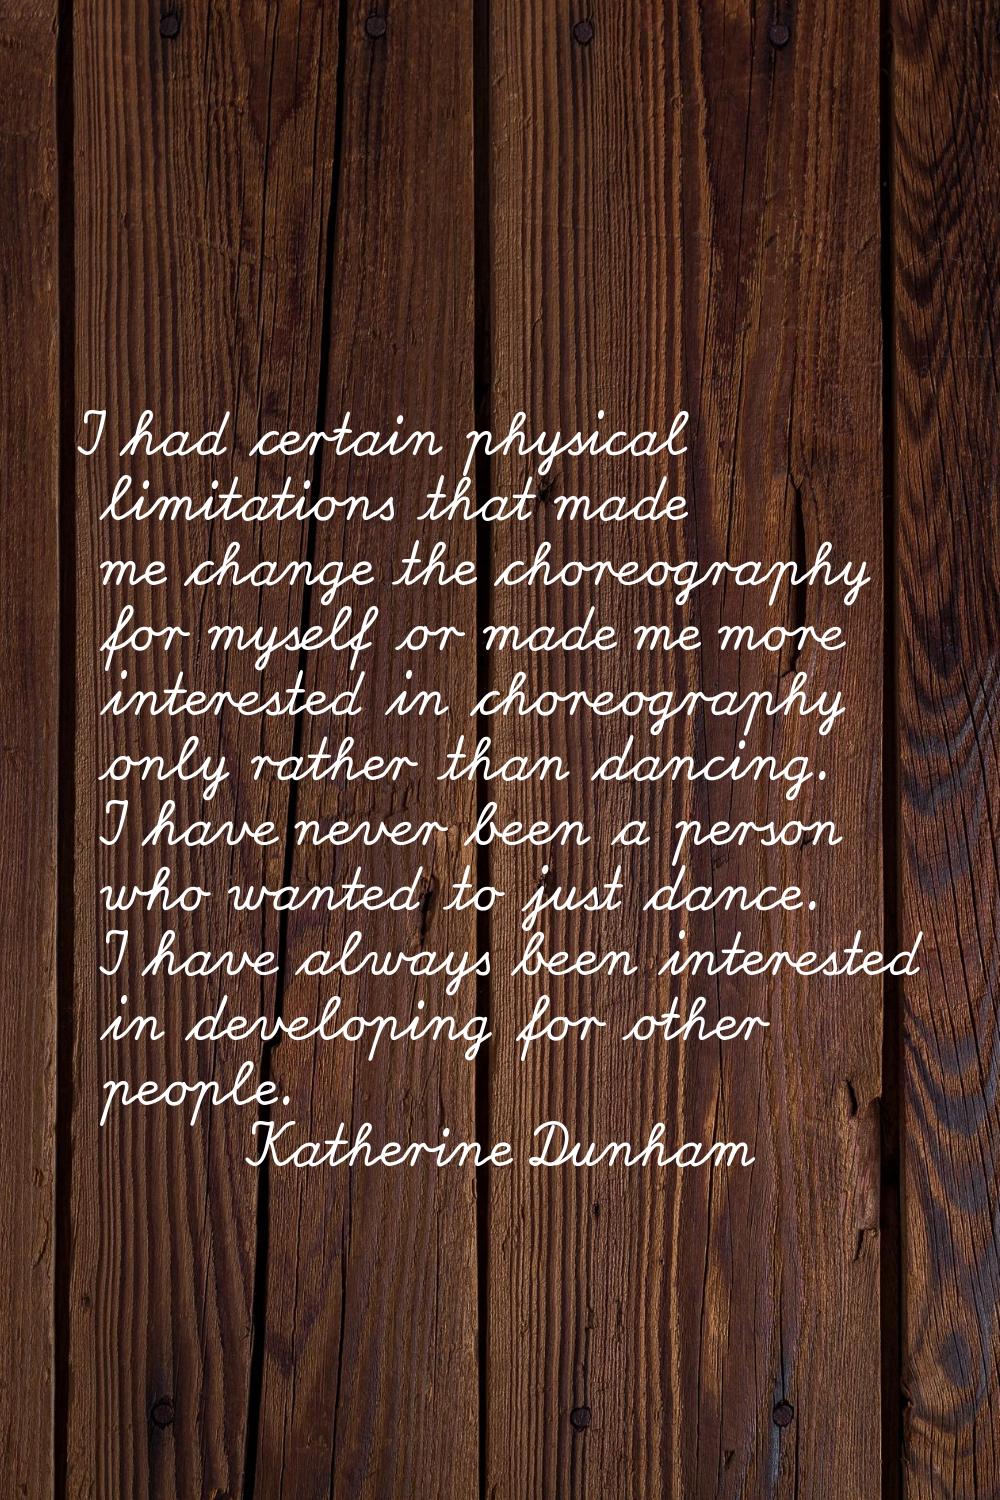 I had certain physical limitations that made me change the choreography for myself or made me more 